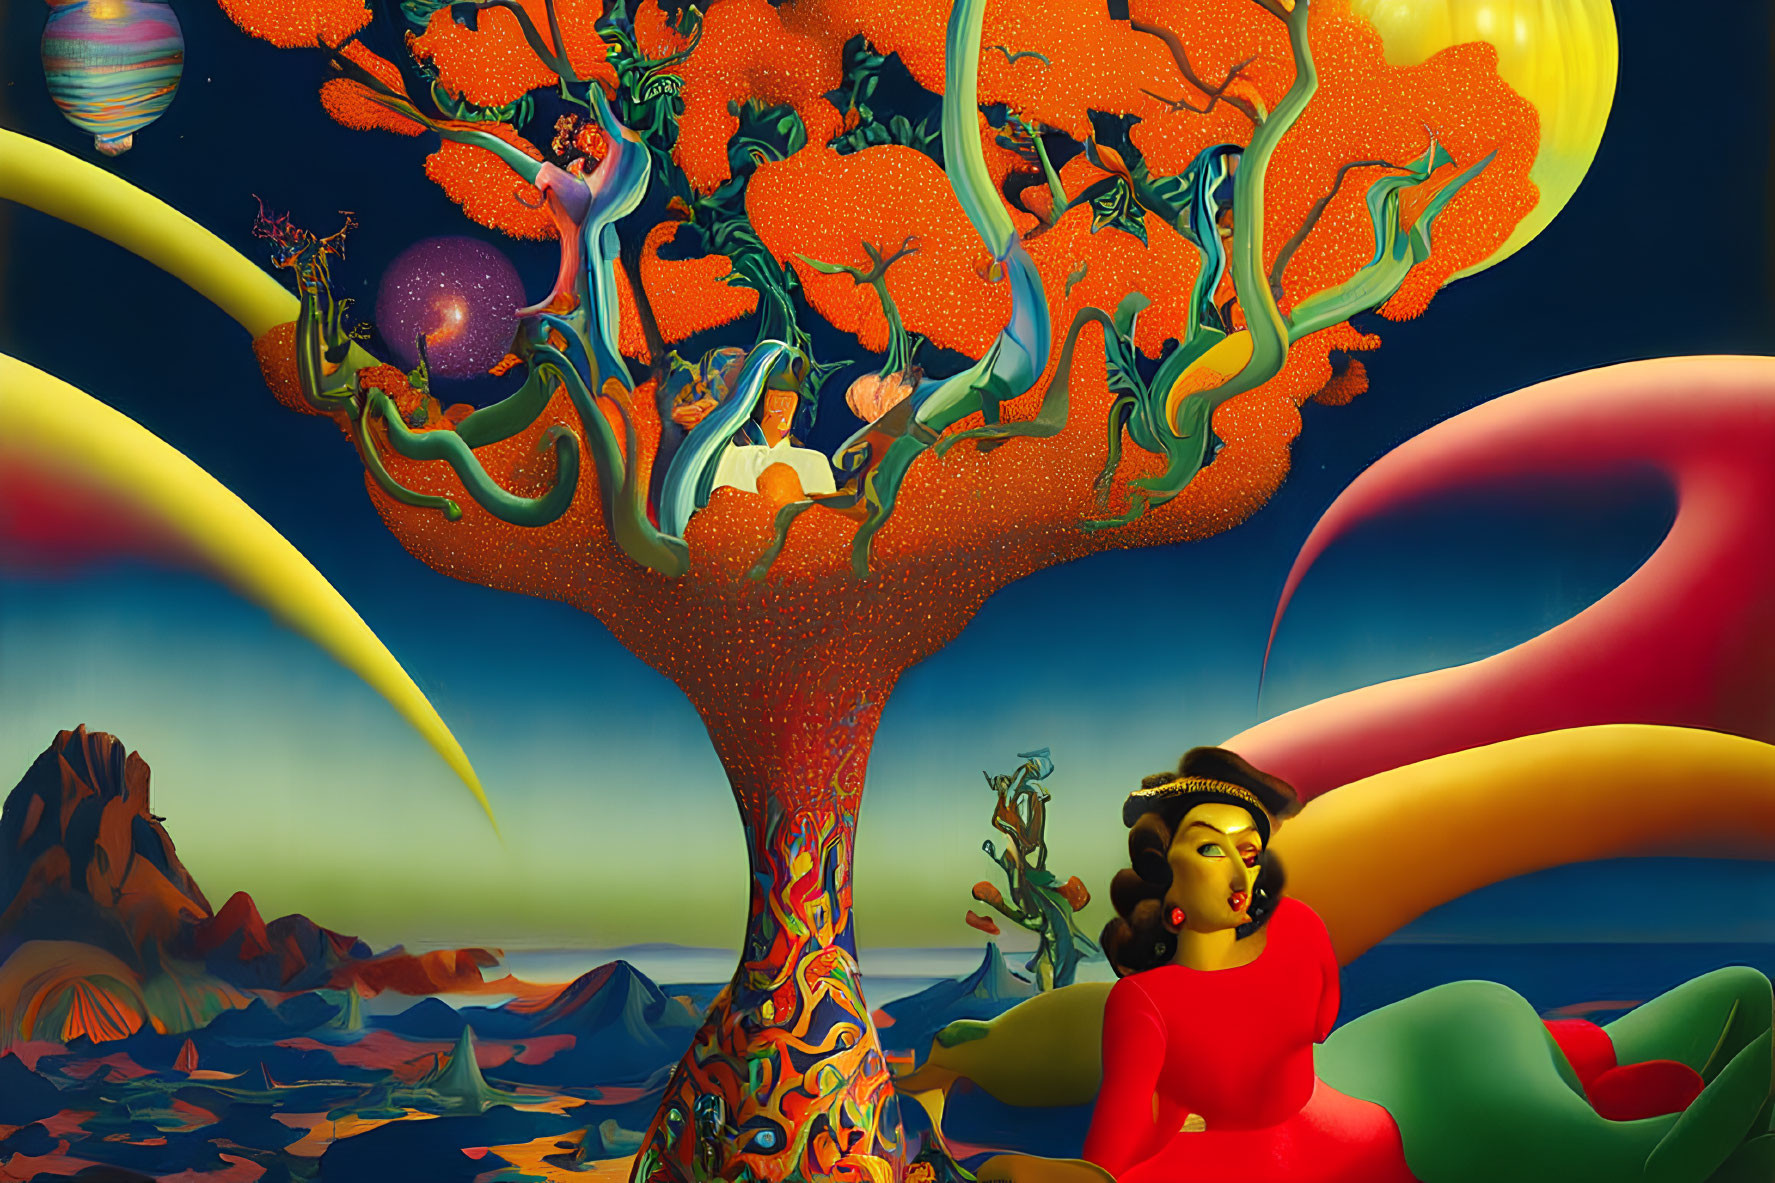 Vibrant tree, whimsical creatures, woman in red in surreal landscape